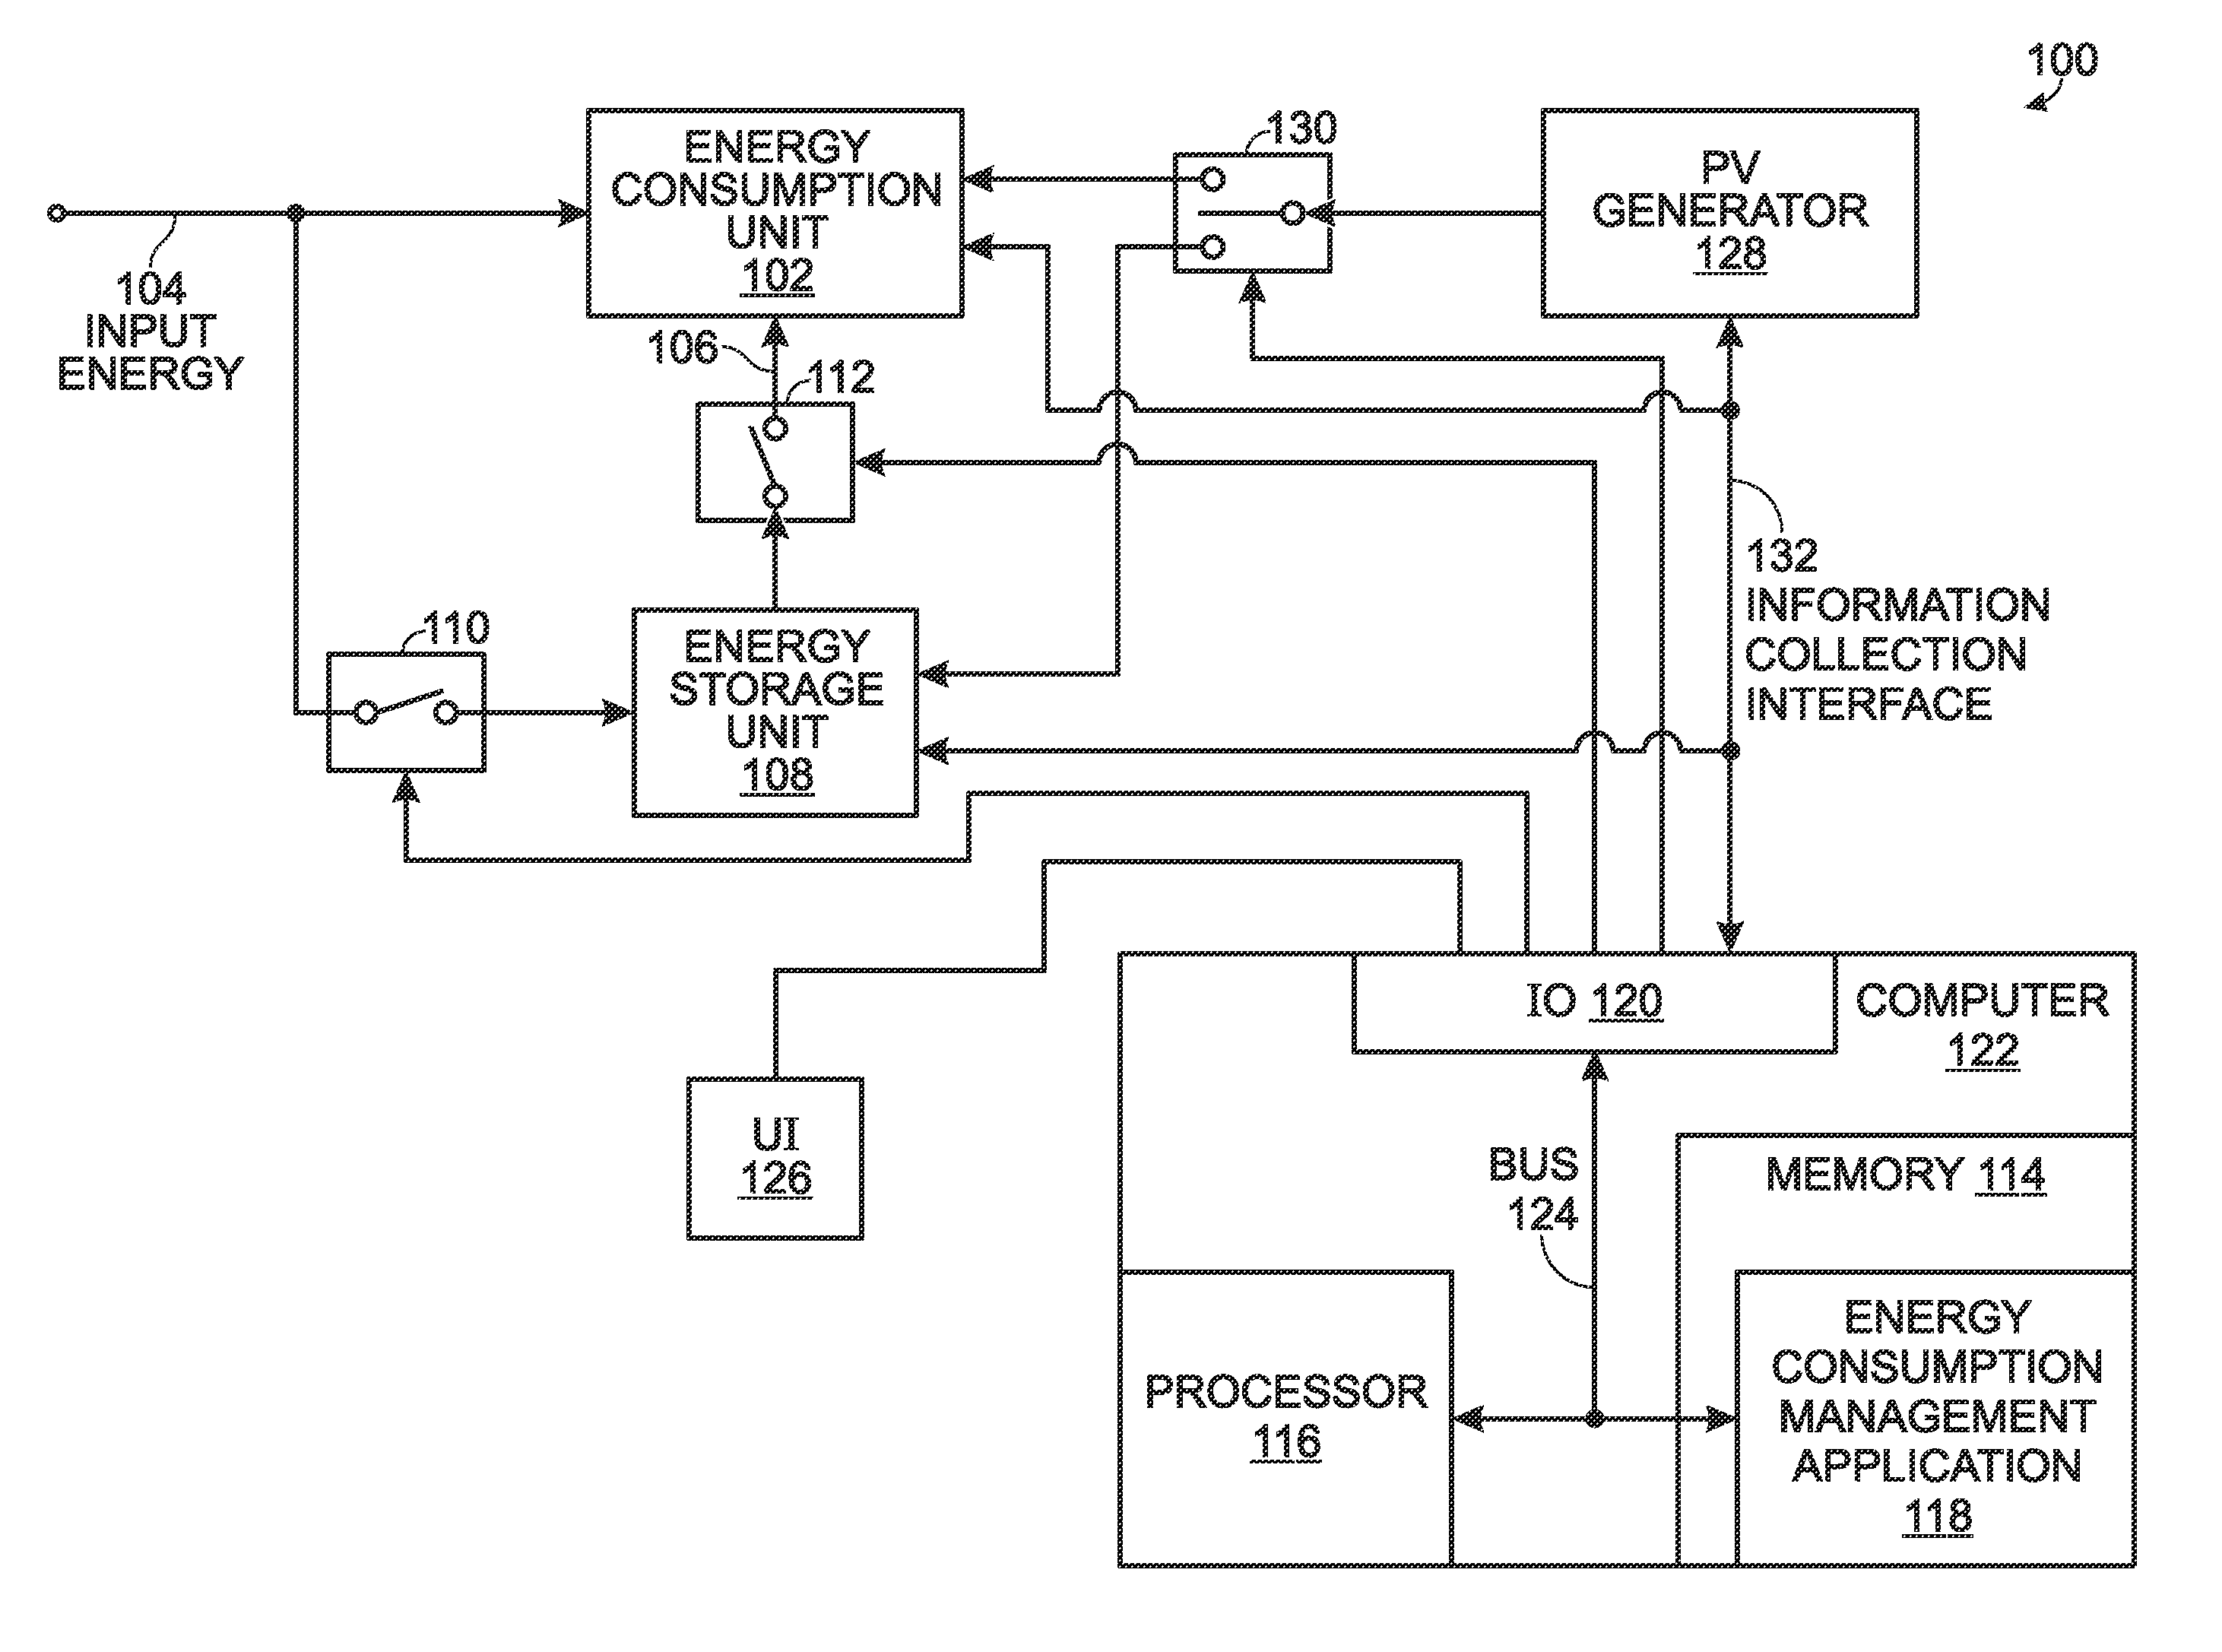 System and method for energy storage management